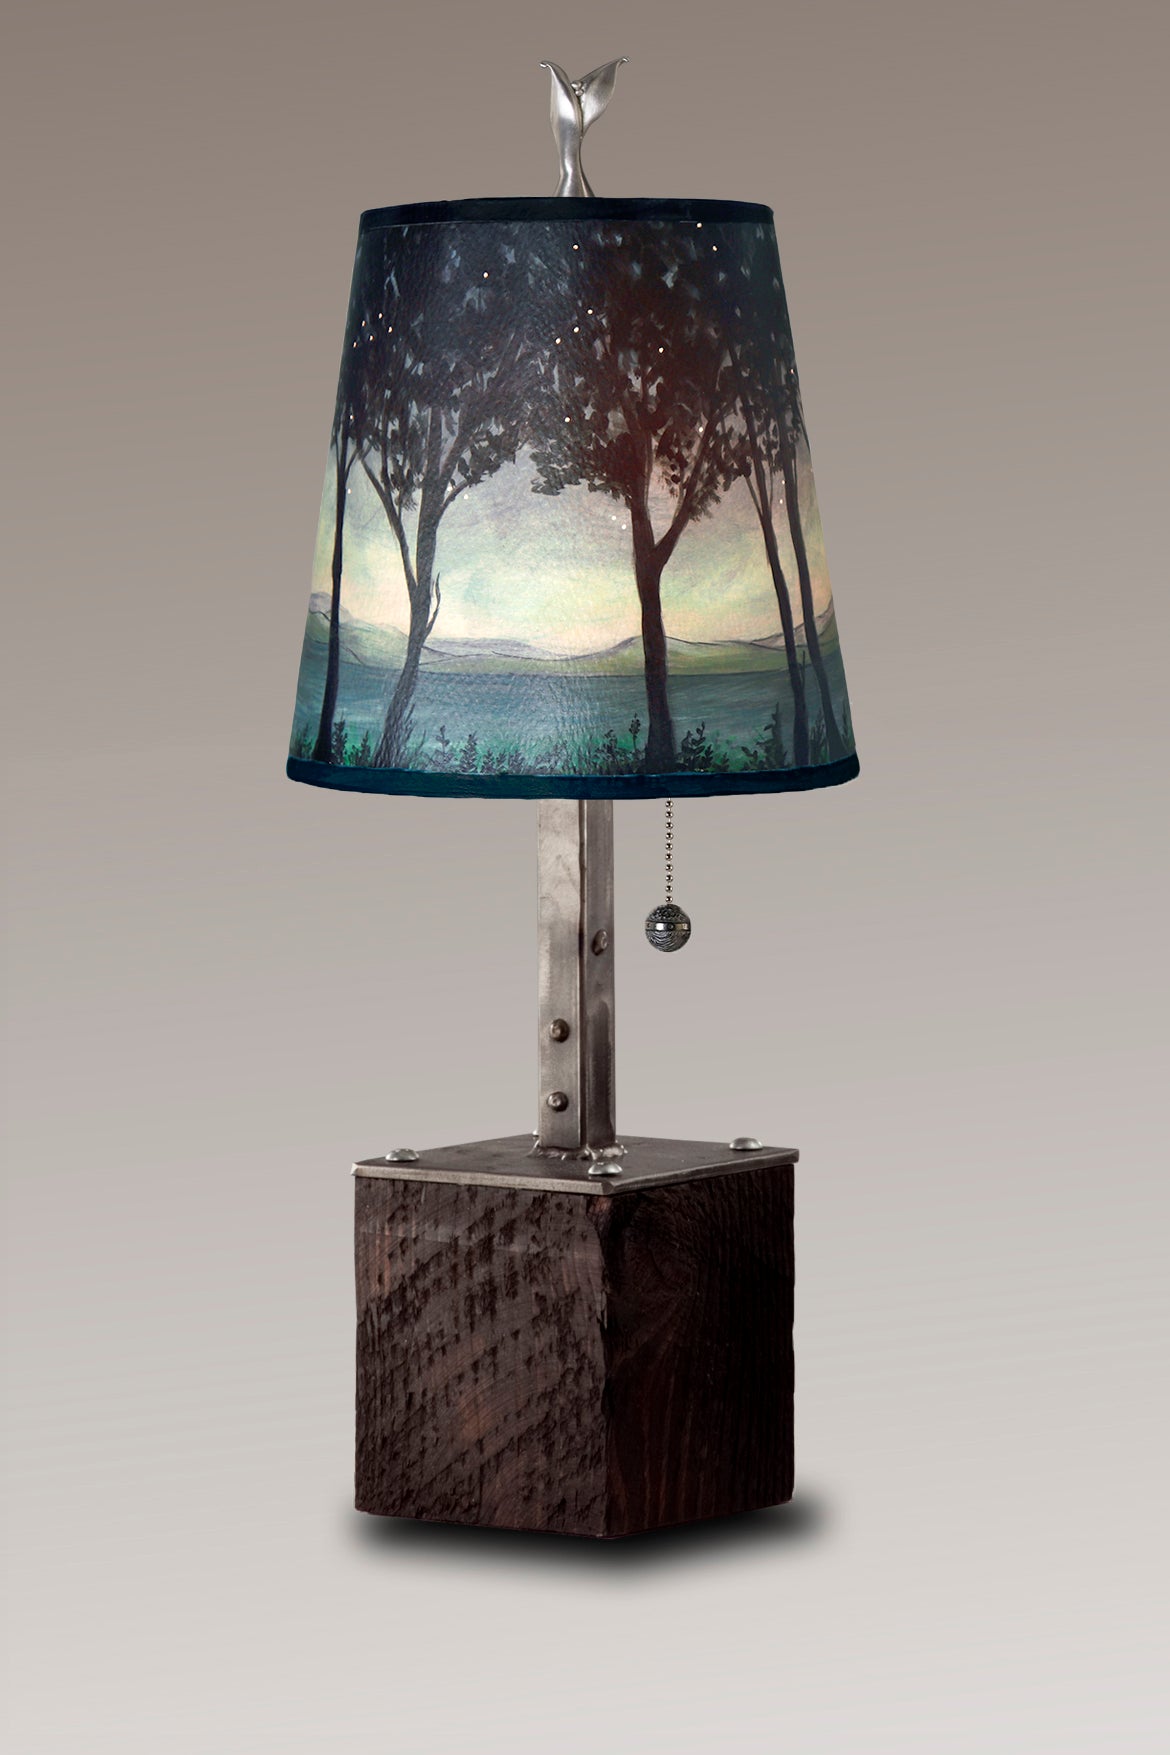 Copper Table Lamp with Small Drum Shade in Birch Lines - Janna Ugone & Co